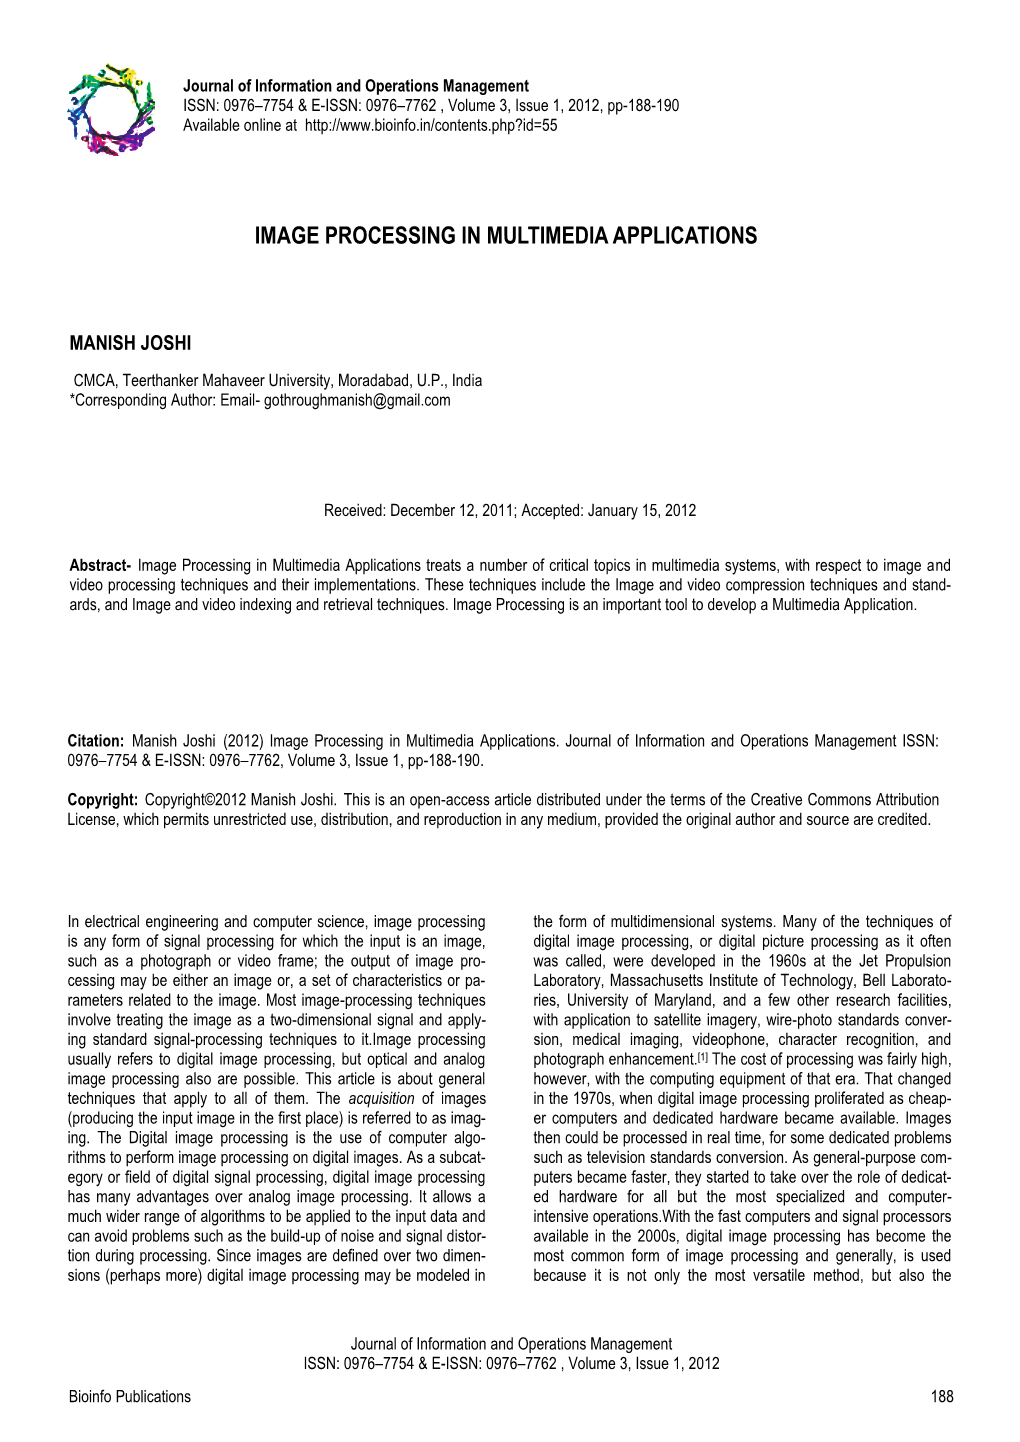 Image Processing in Multimedia Applications